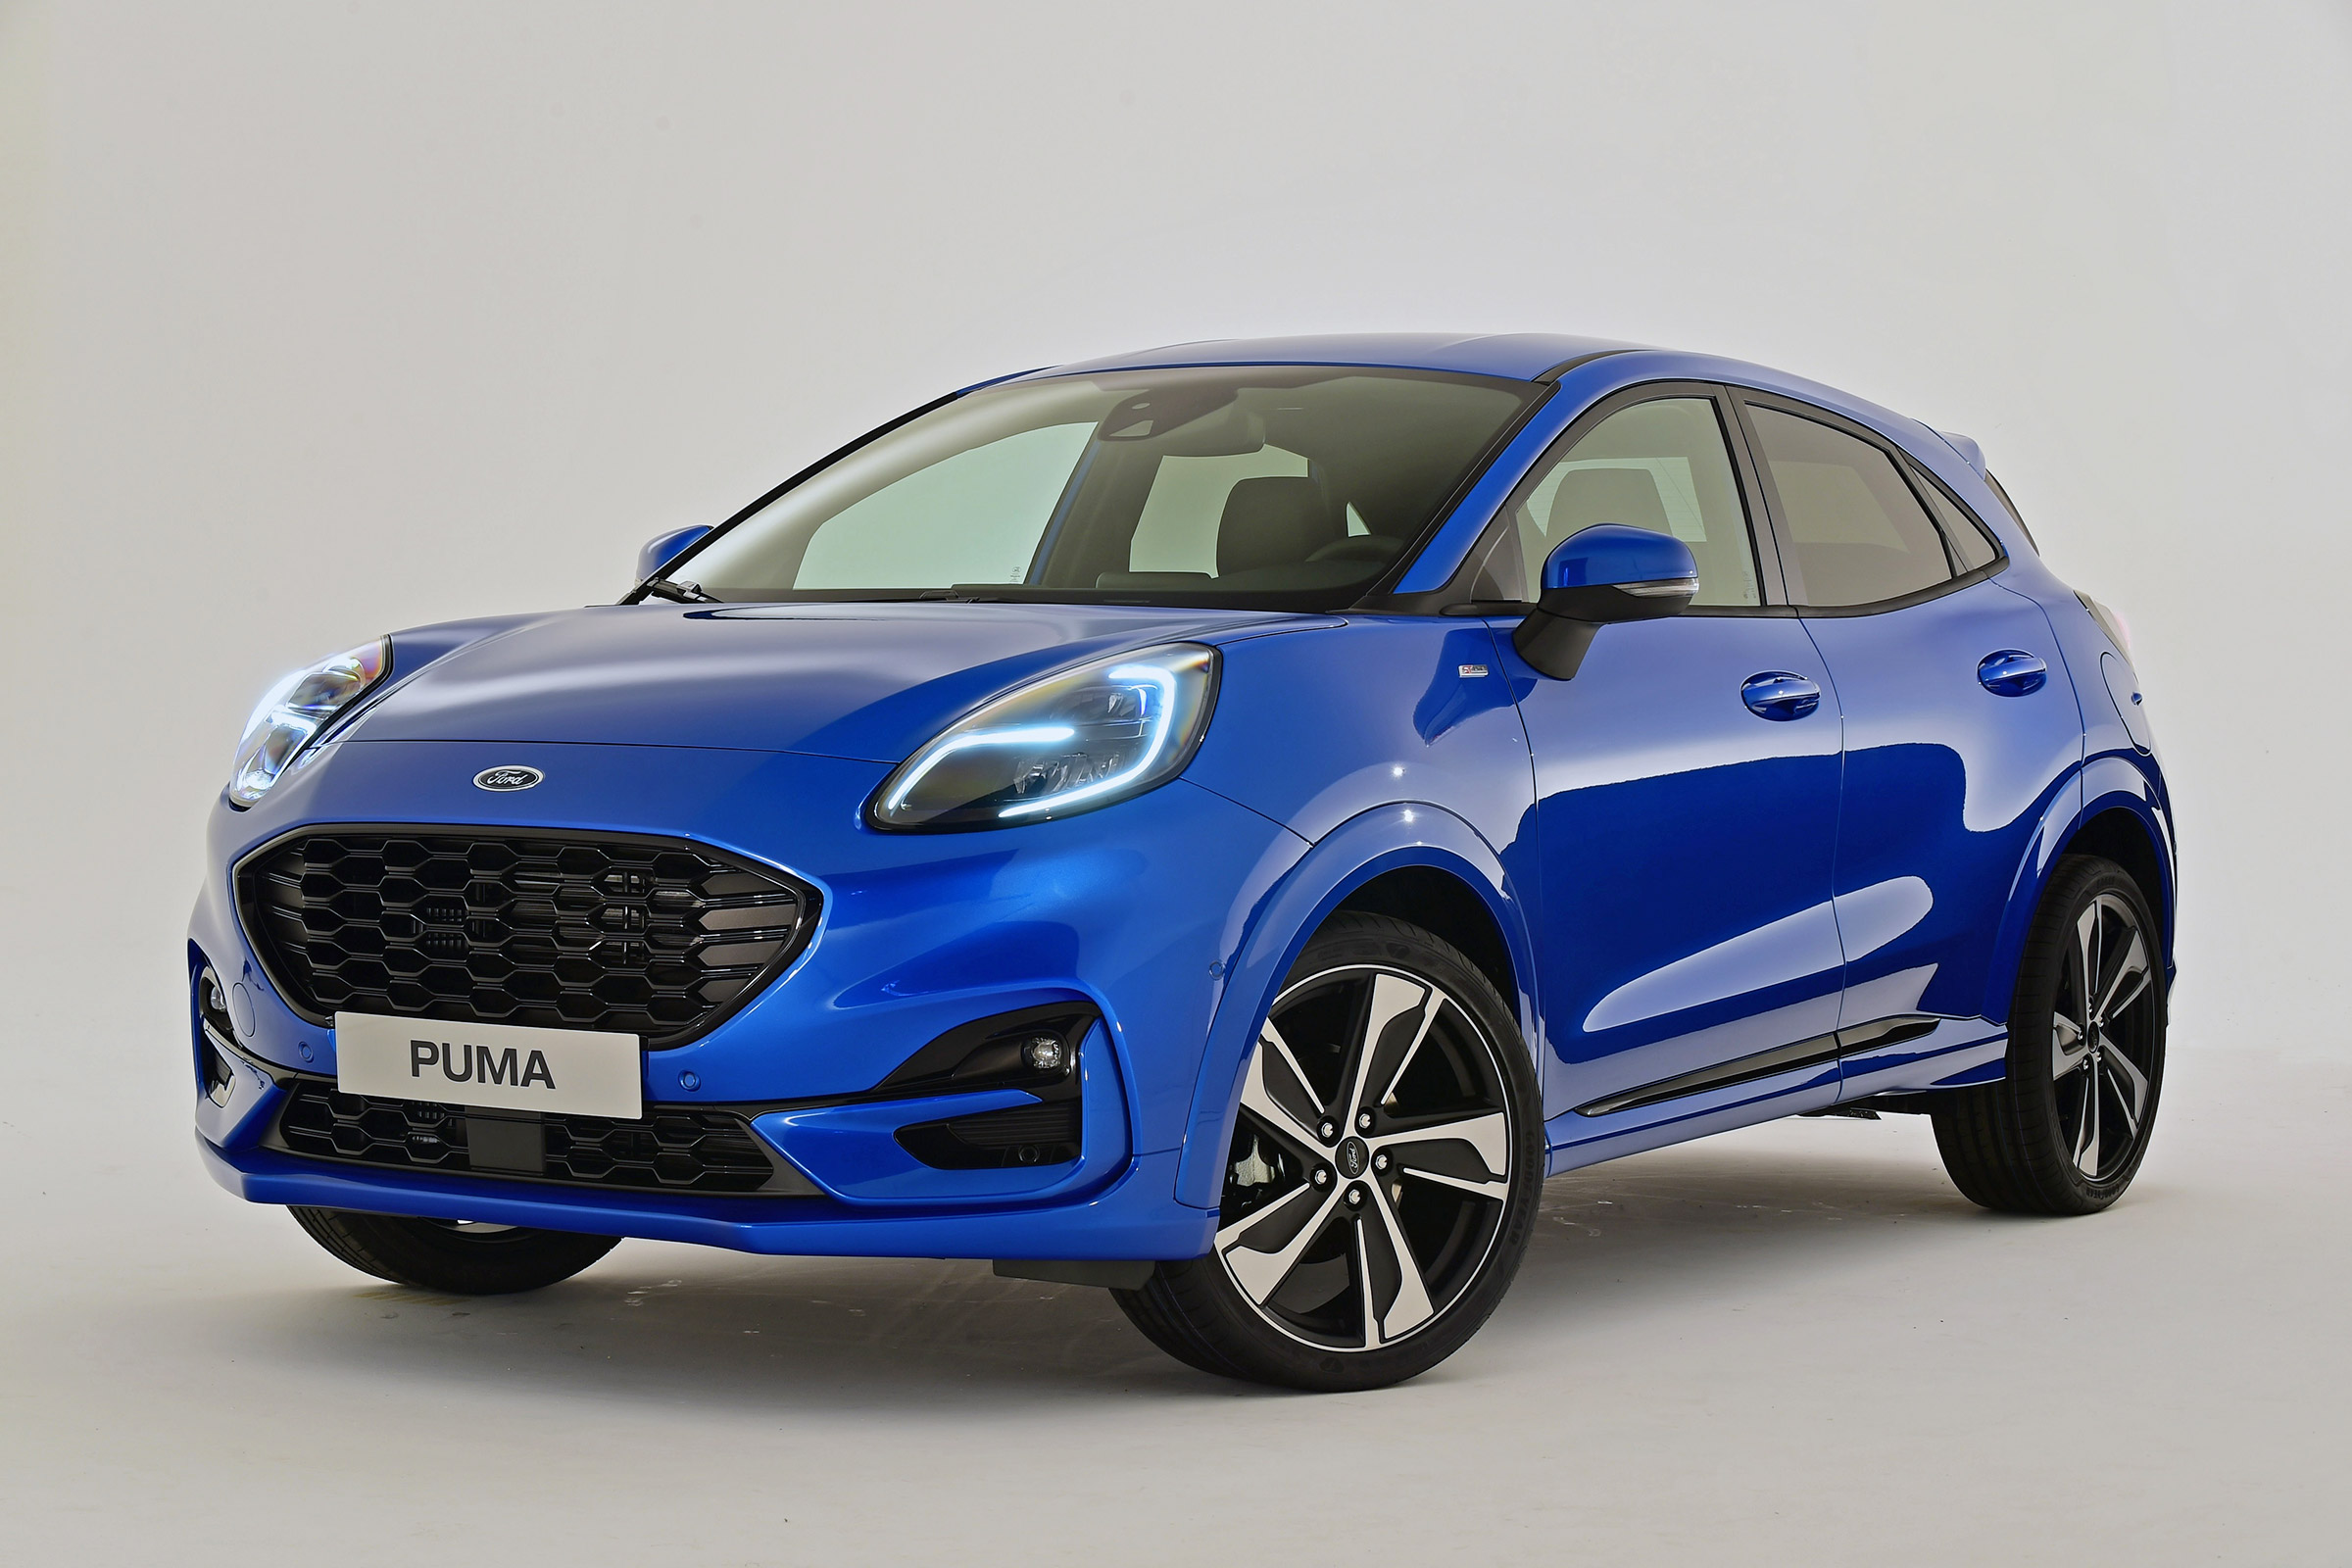 New 2020 Ford Puma: prices announced 